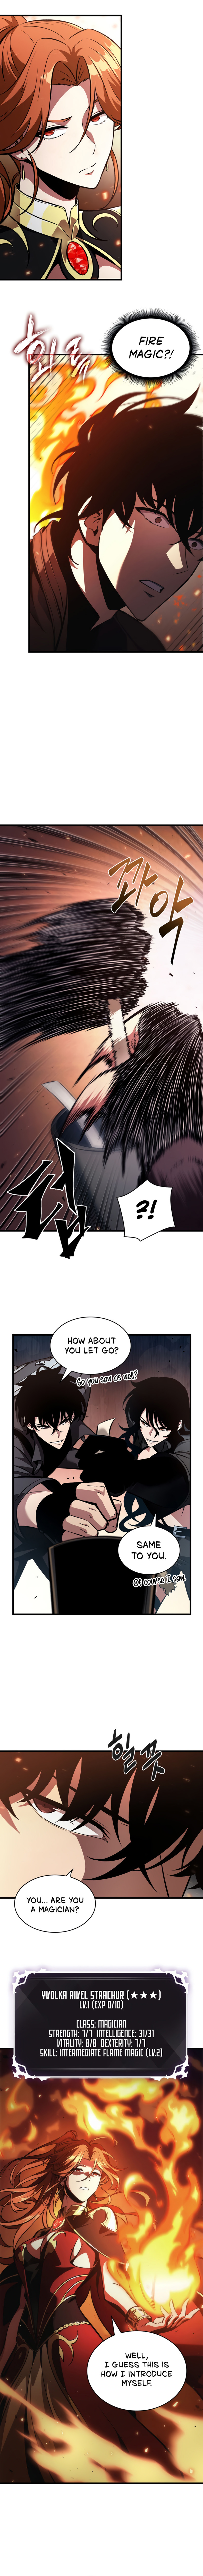 Pick Me Up - Chapter 20 Page 7